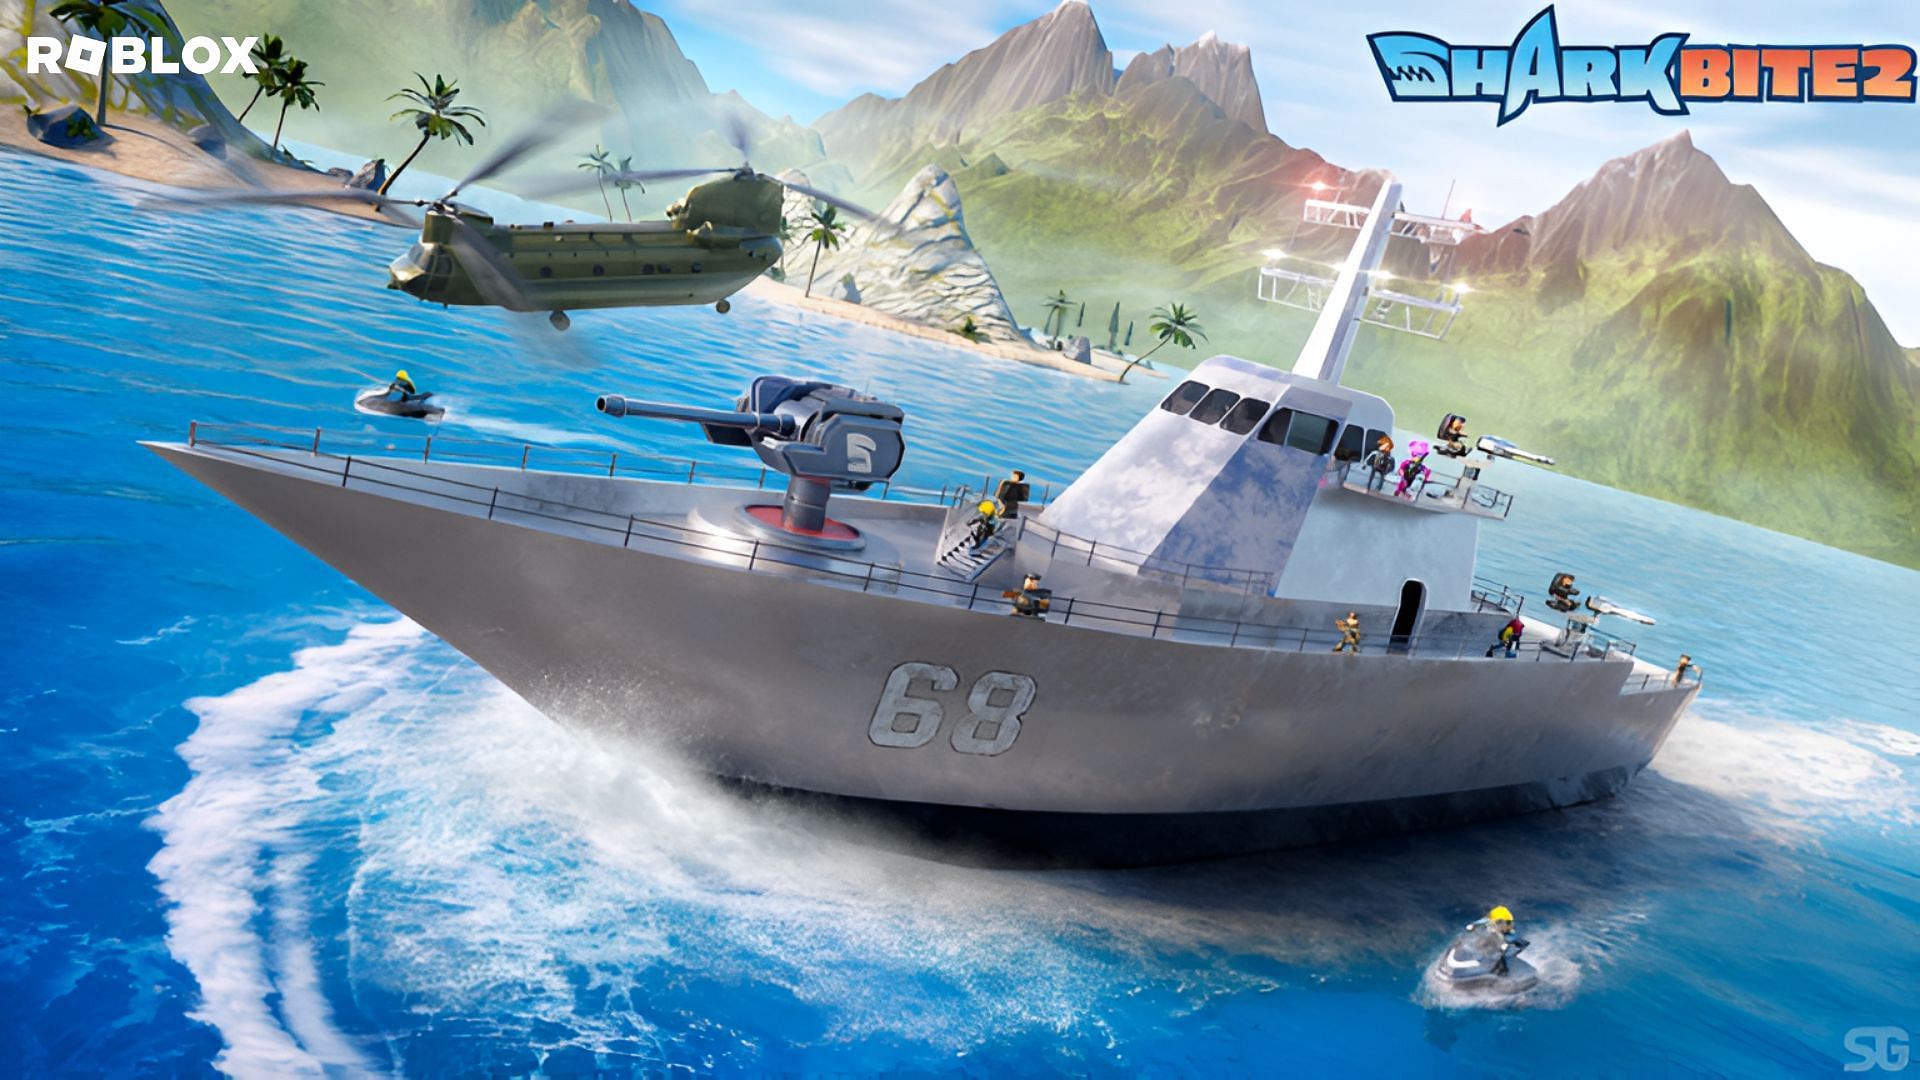 What are the codes in Sharkbite 2 about? (Image via Roblox)